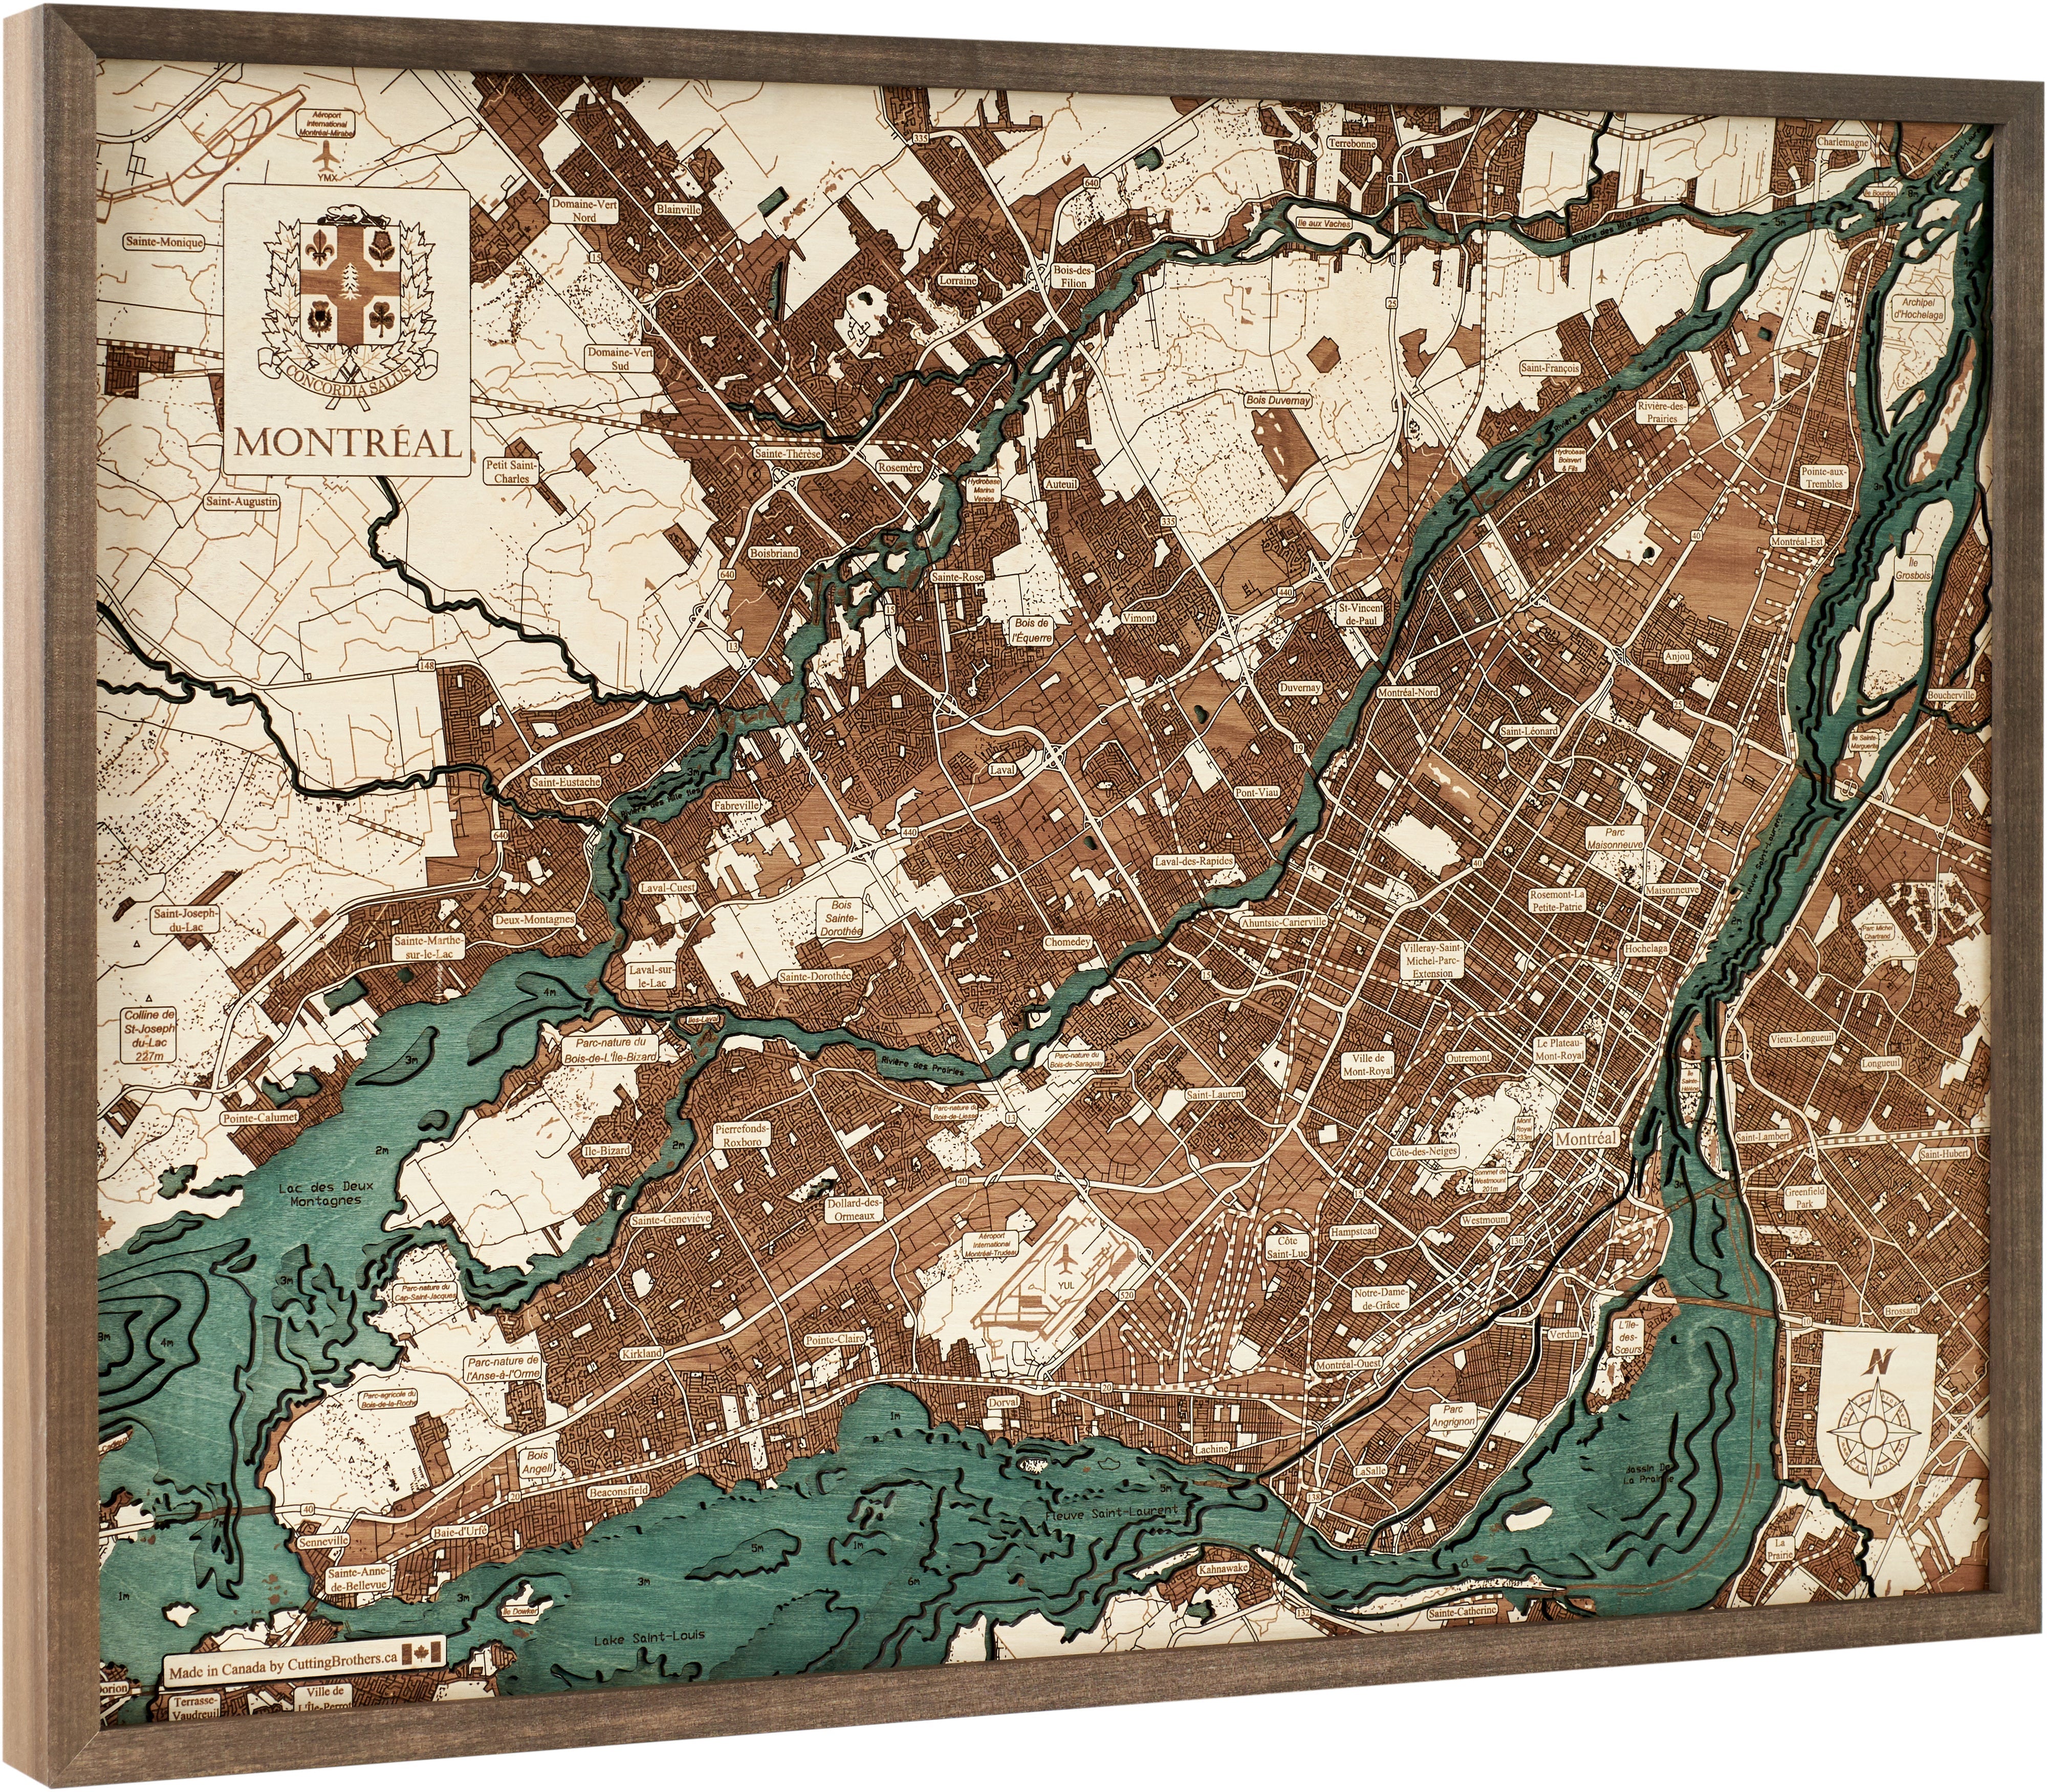 MONTREAL 3D WOODEN WALL MAP - Version L